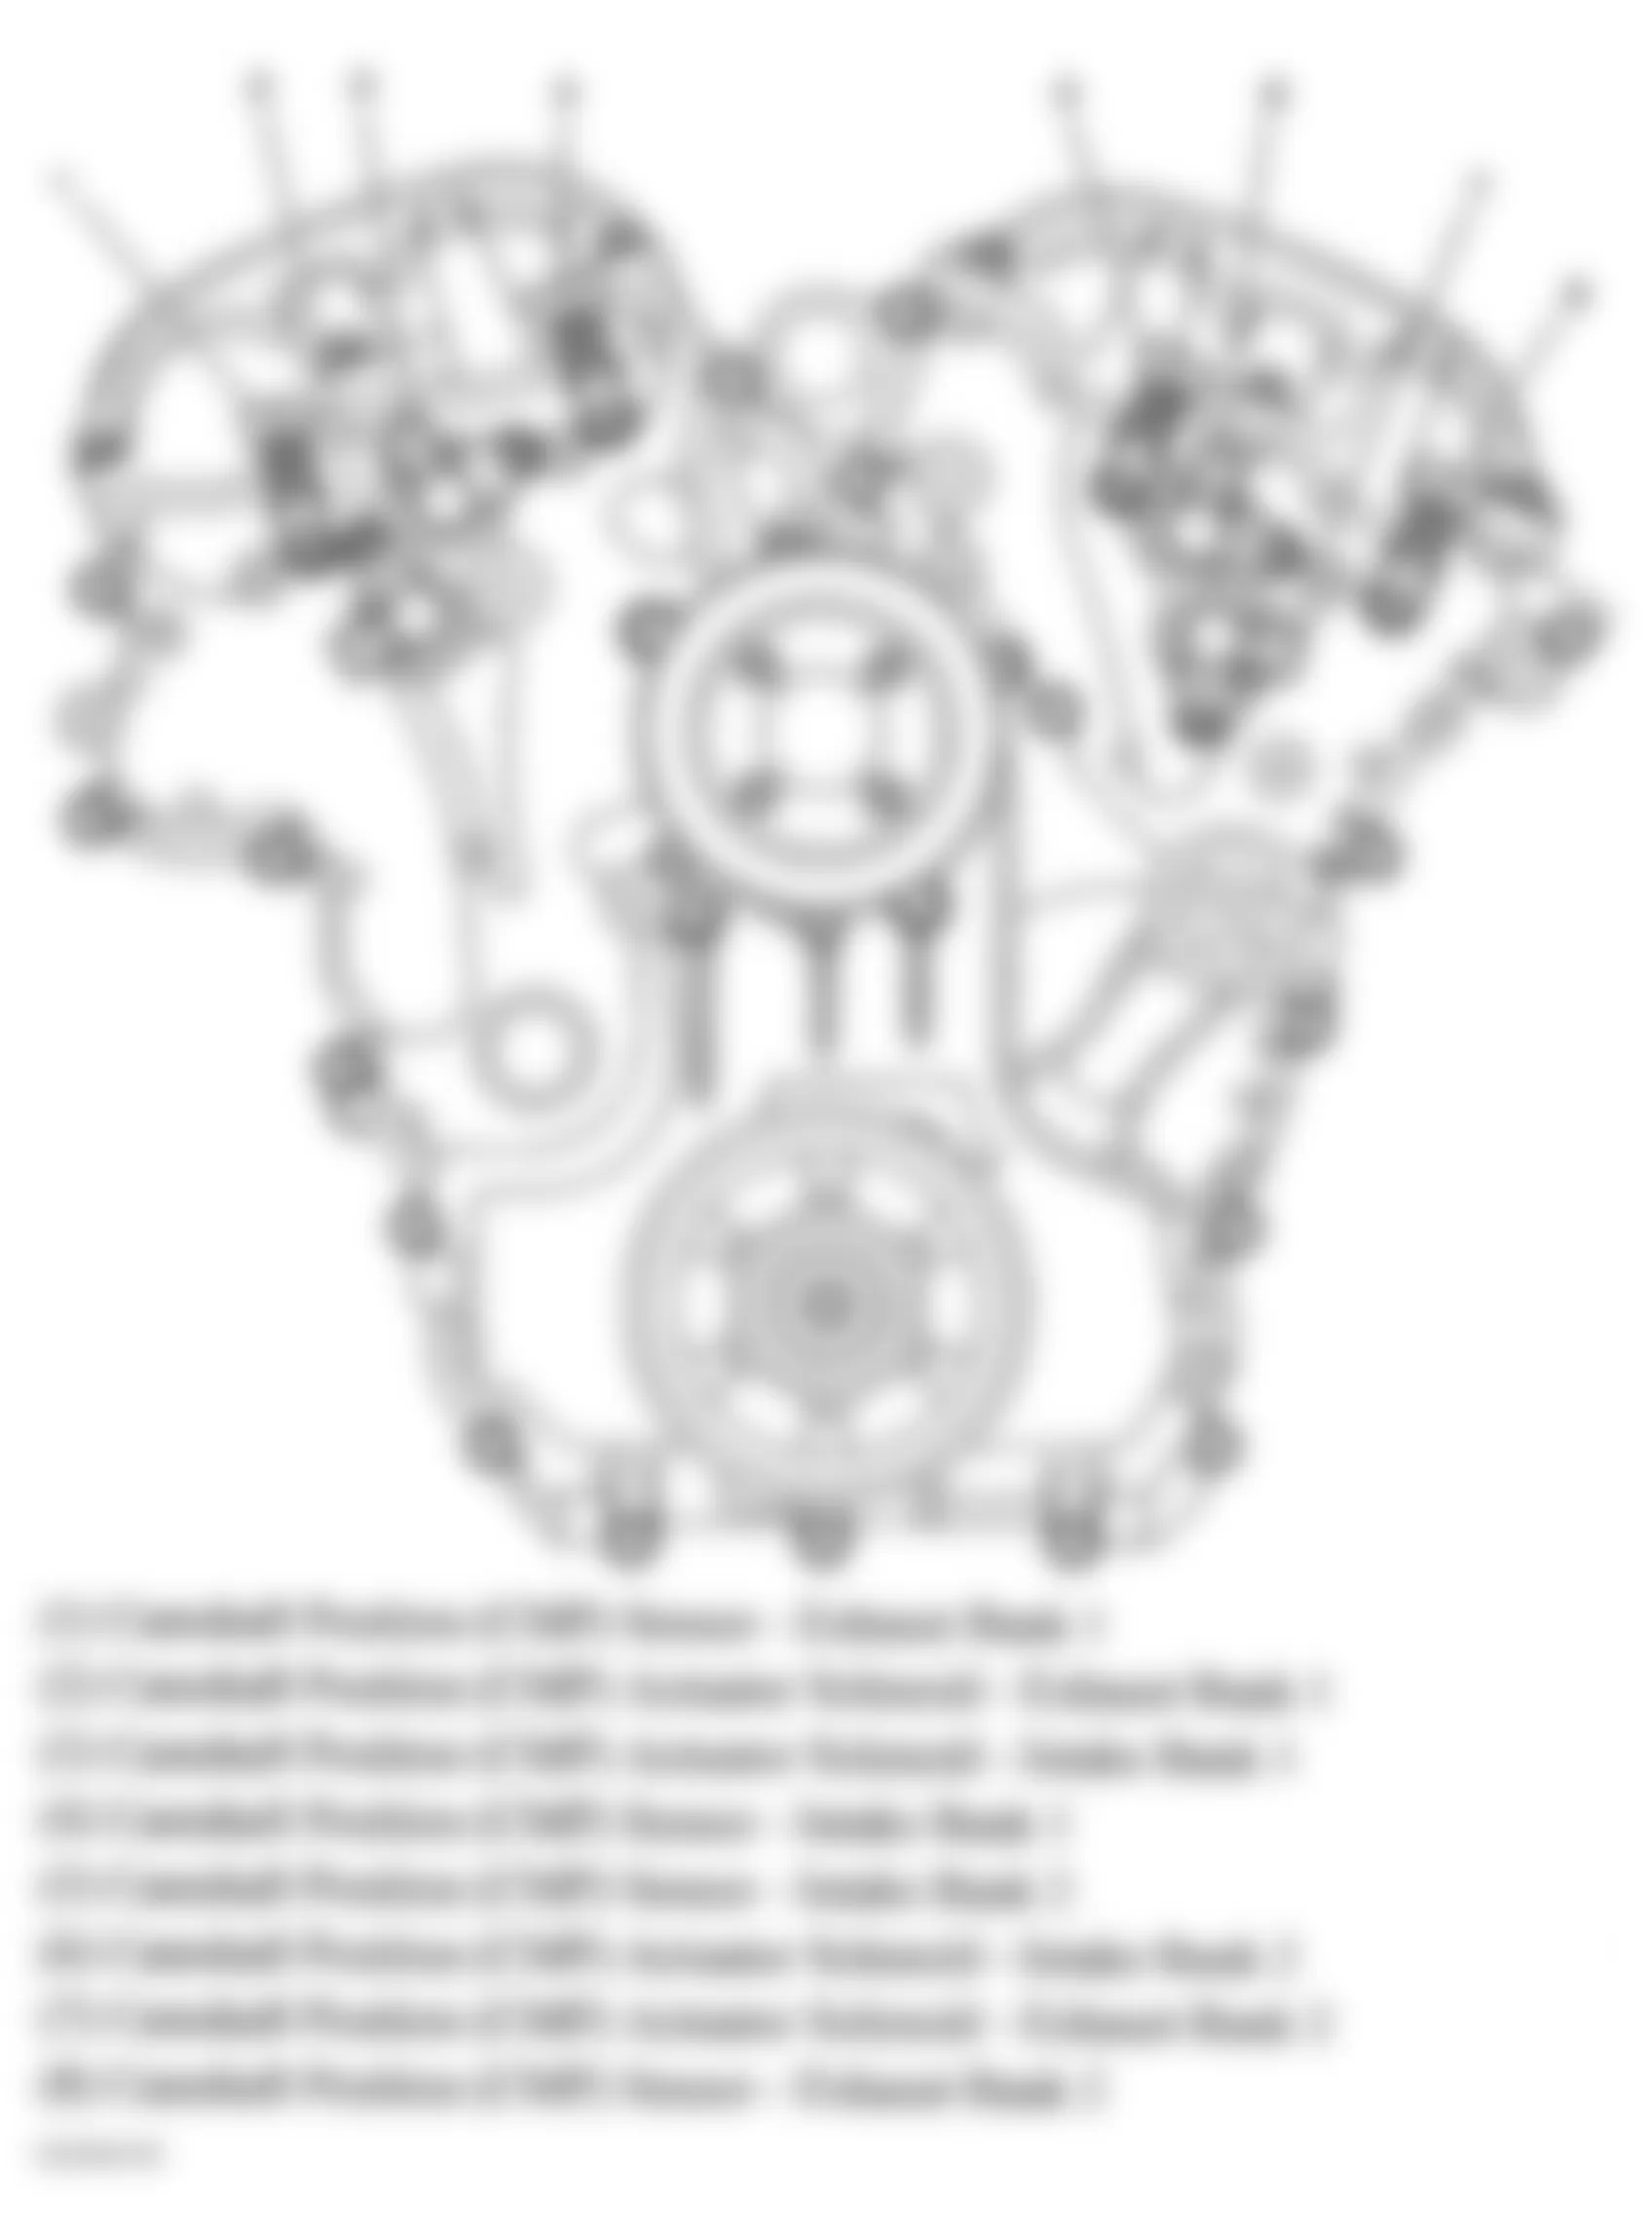 Buick LaCrosse CX 2006 - Component Locations -  Front Of Engine (3.6L)